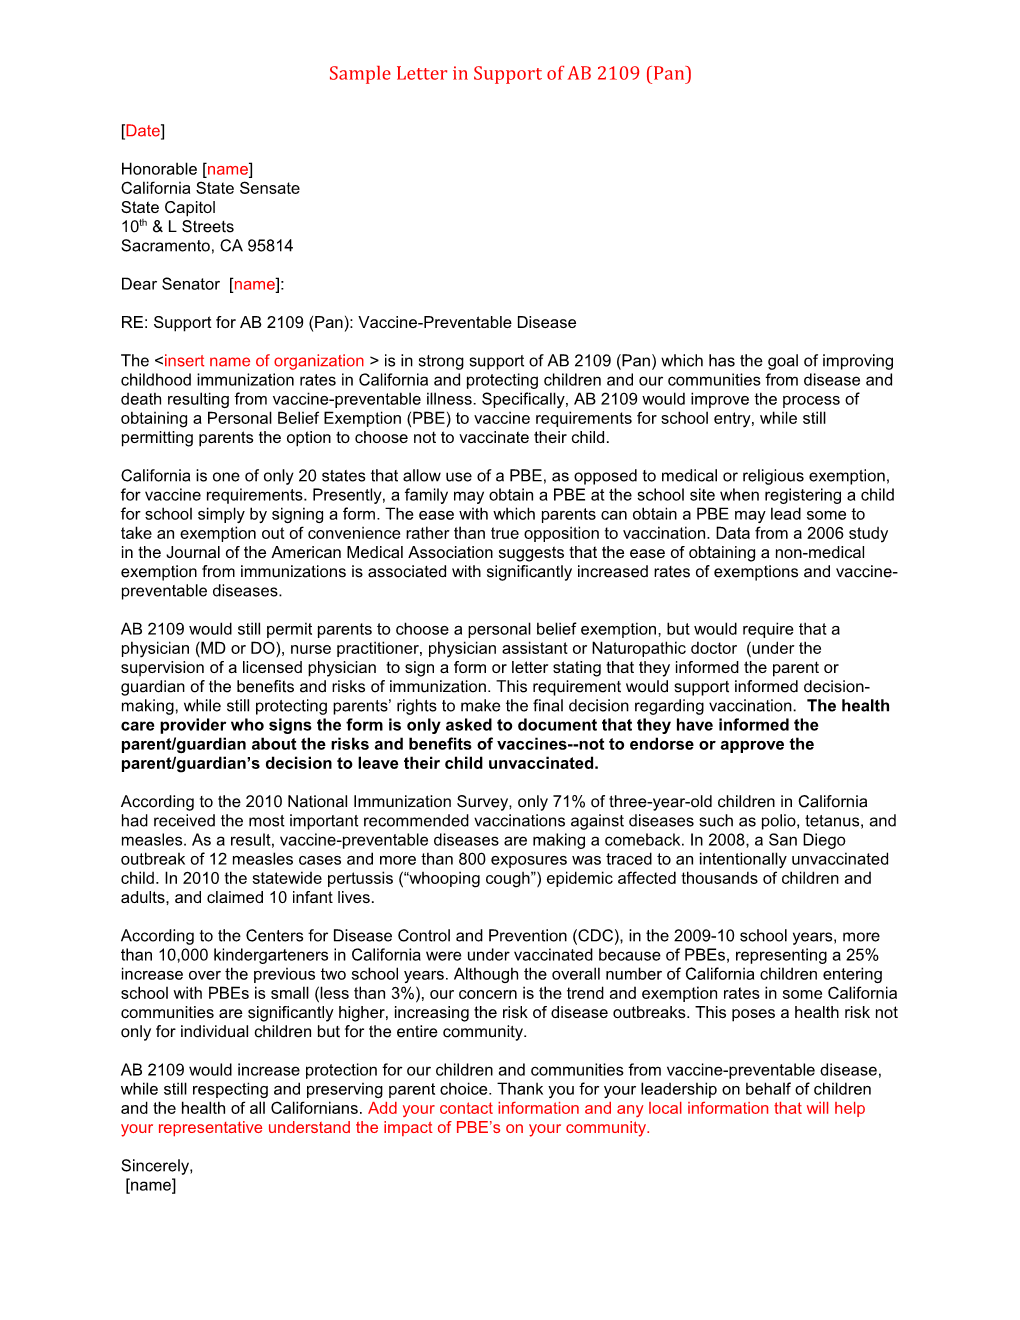 Sample Letter in Support of AB 2109 (Pan)